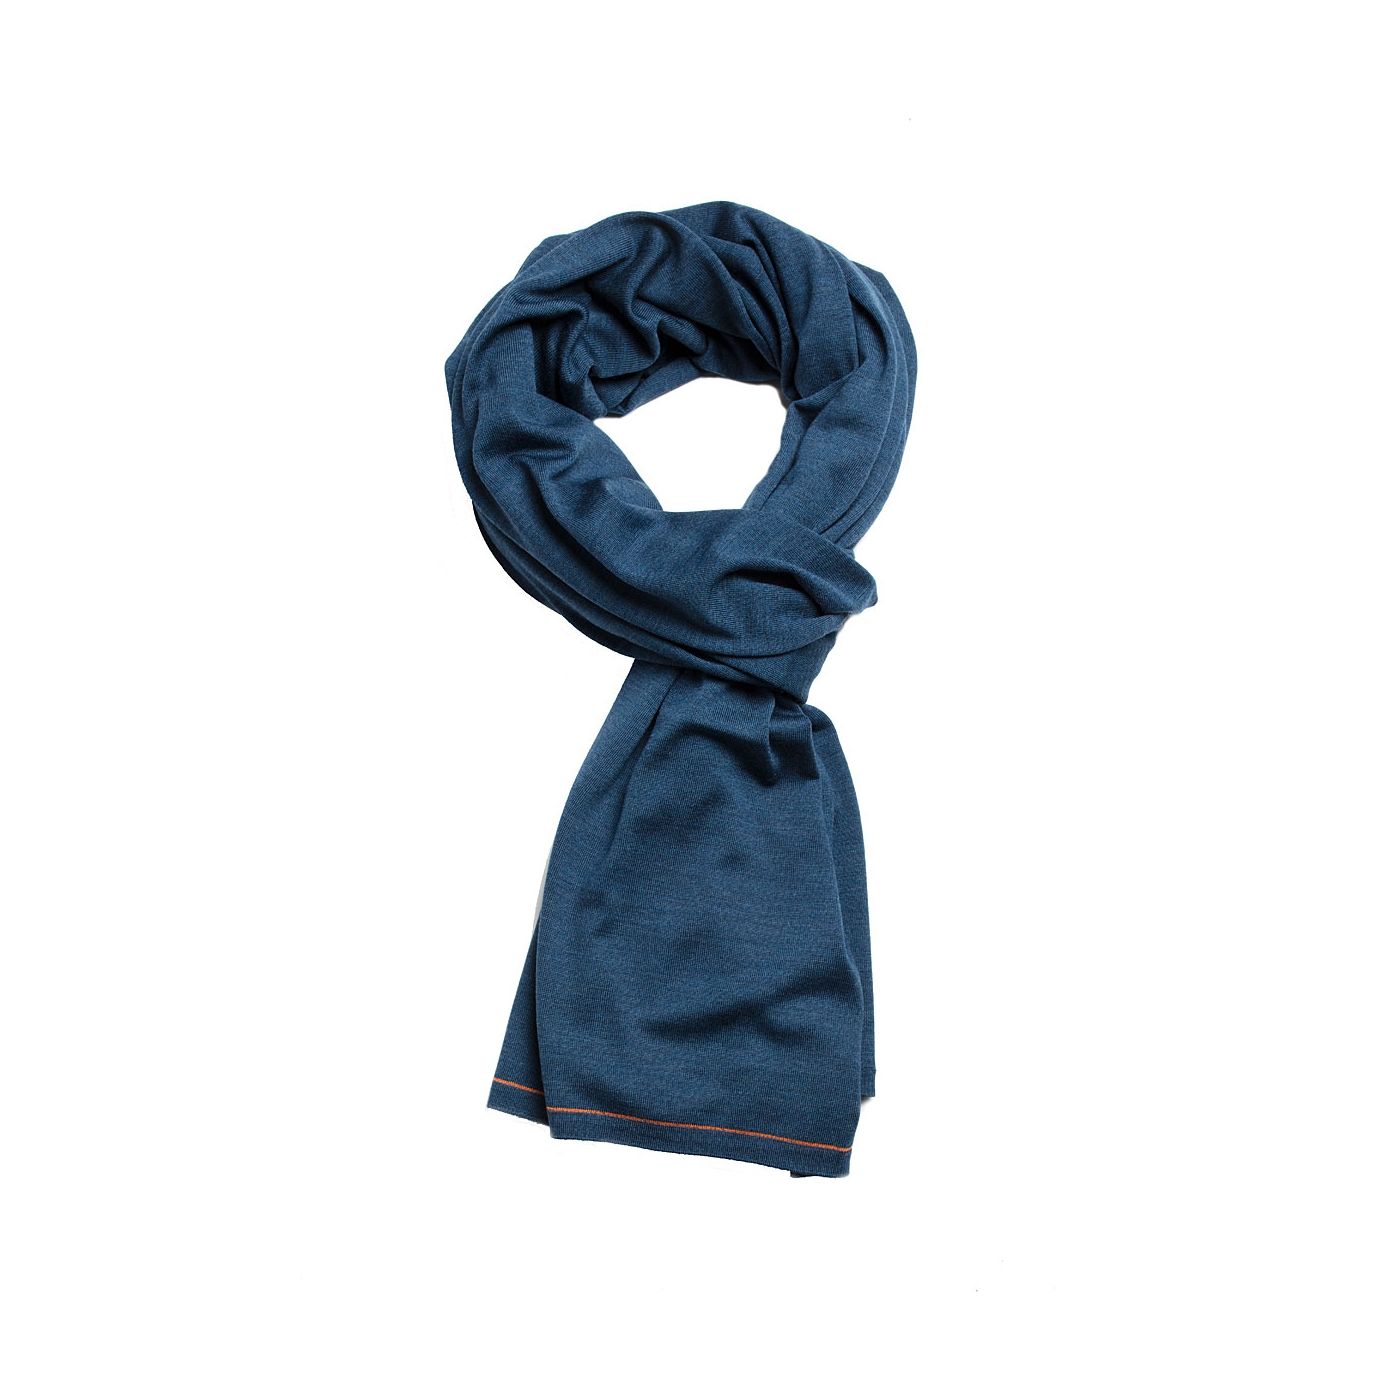 Scarf for men made of Merino wool in Blue